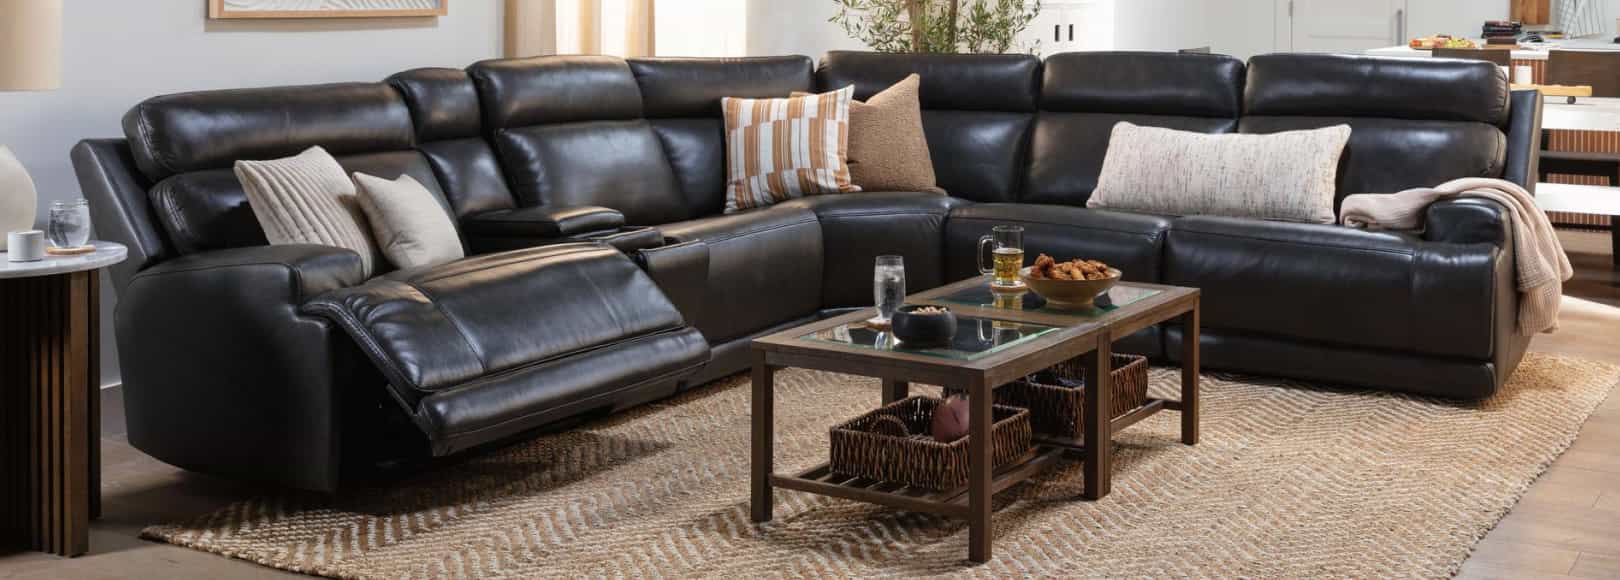 Can You Use Clorox Wipes on Suede Couch Furniture?